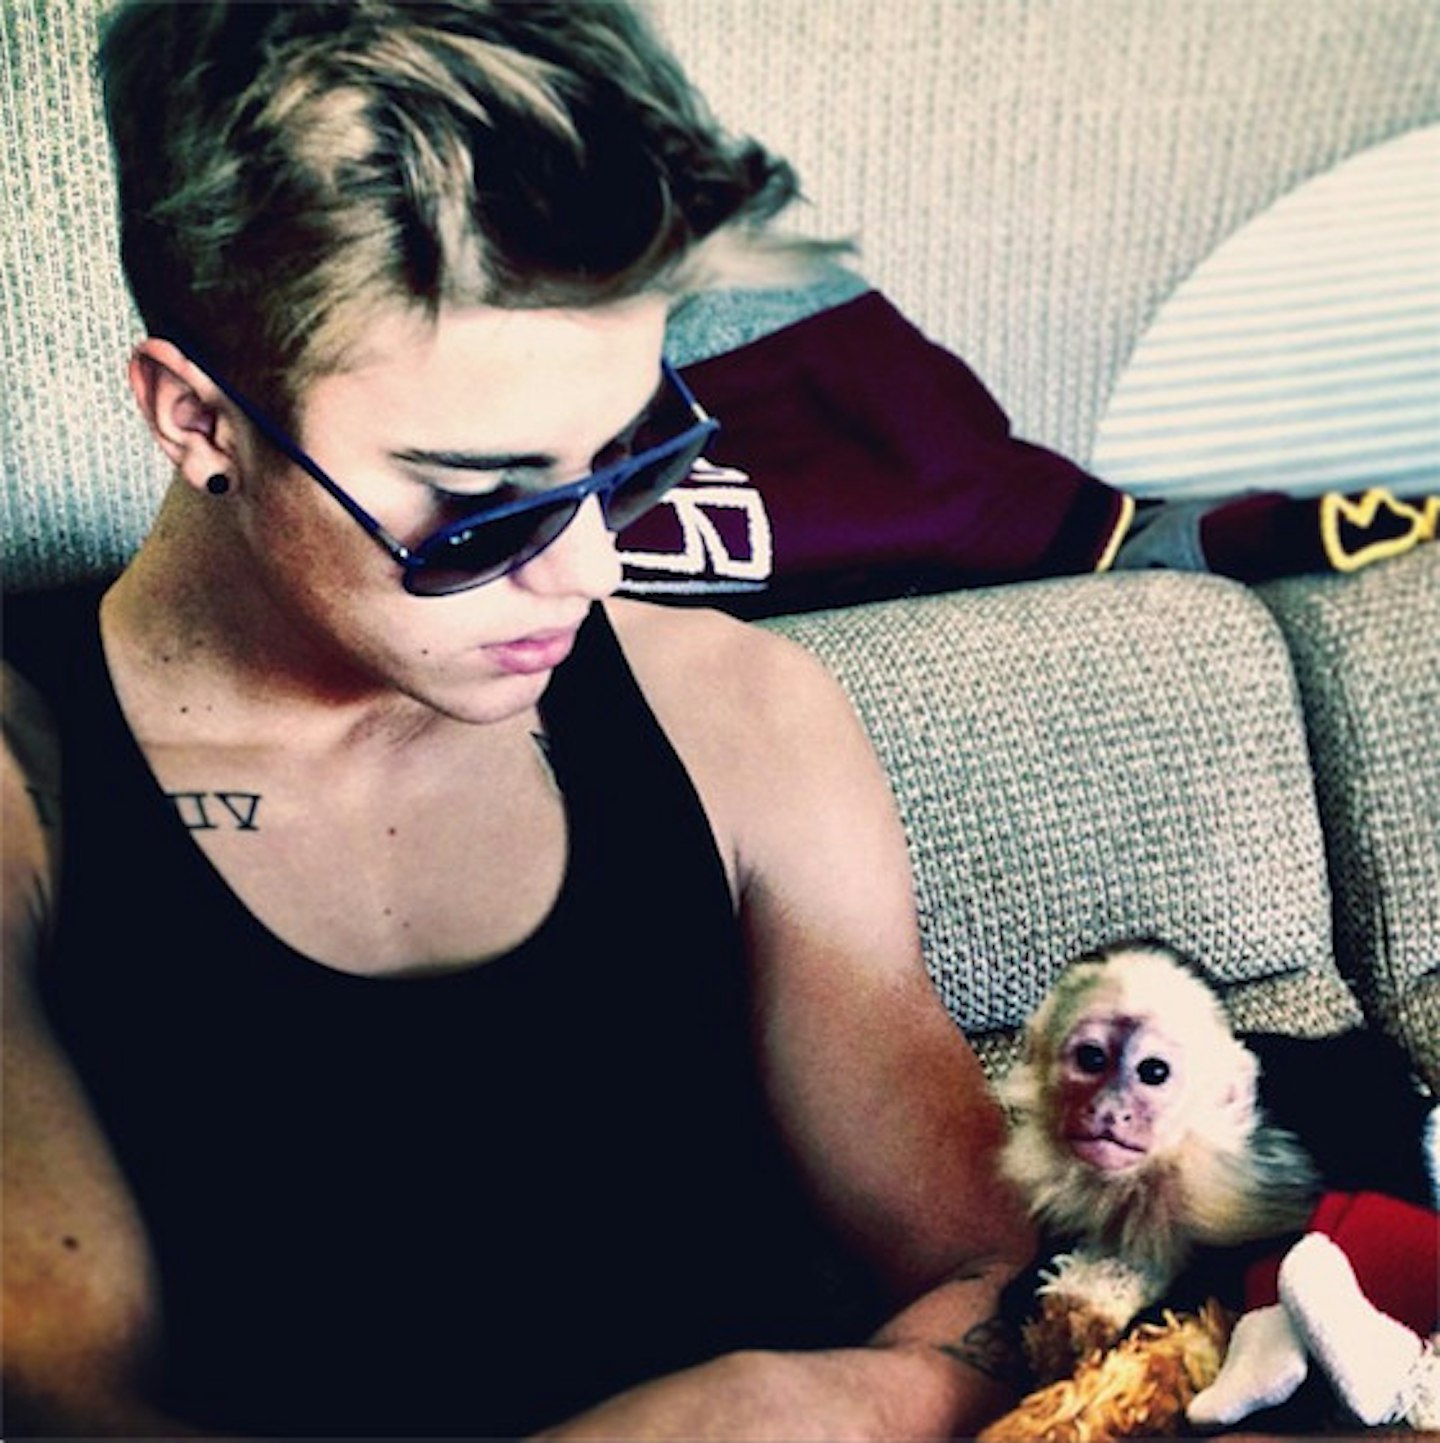 Justin Bieber and his monkey OG Mally